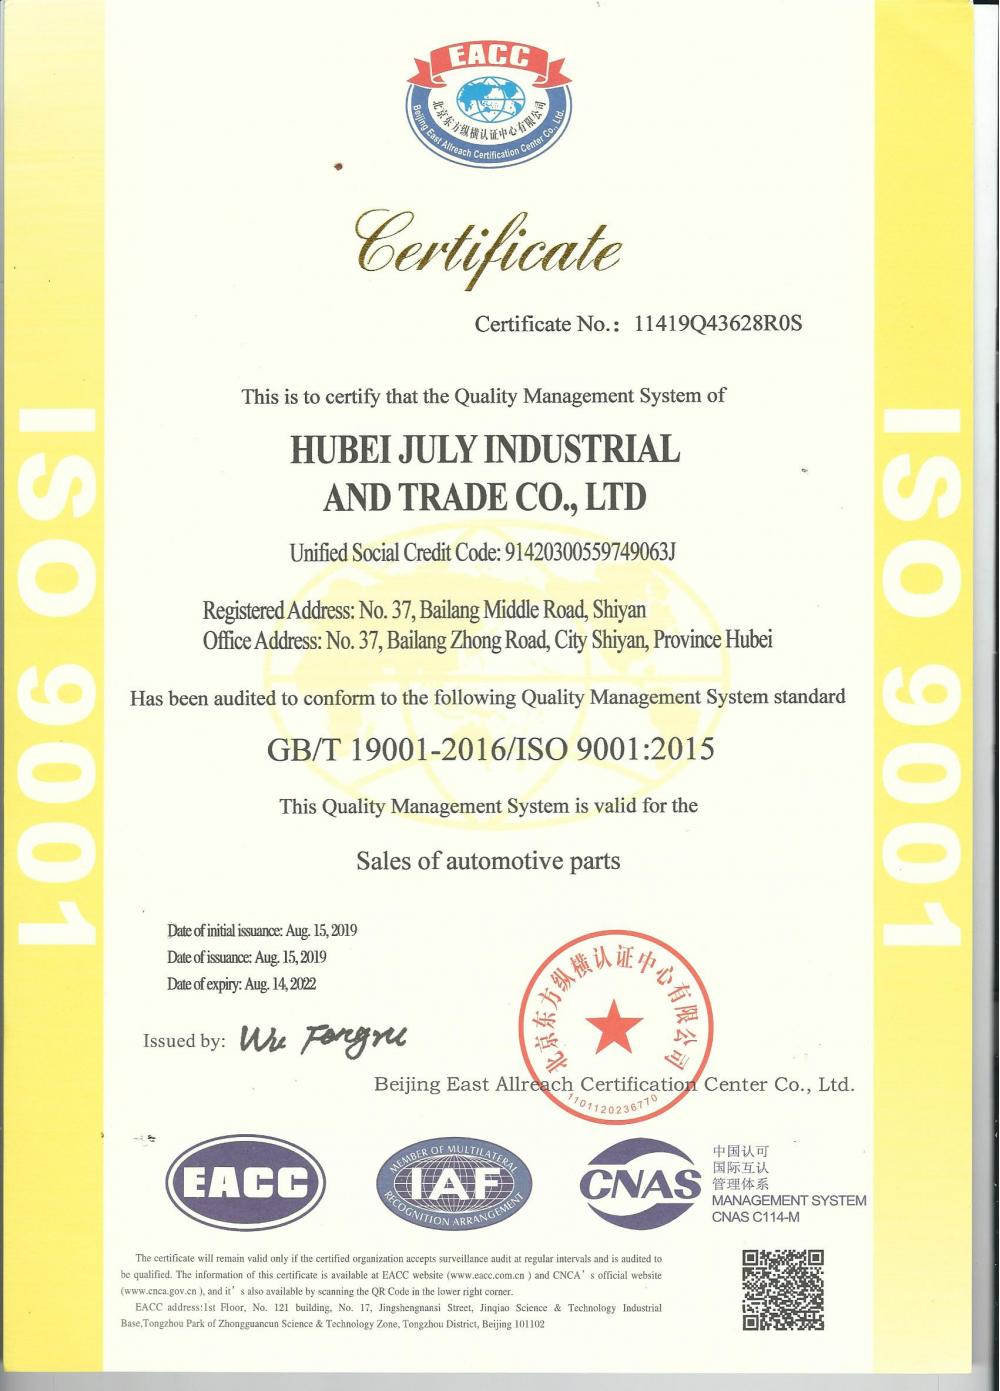 ISO 9001:2015